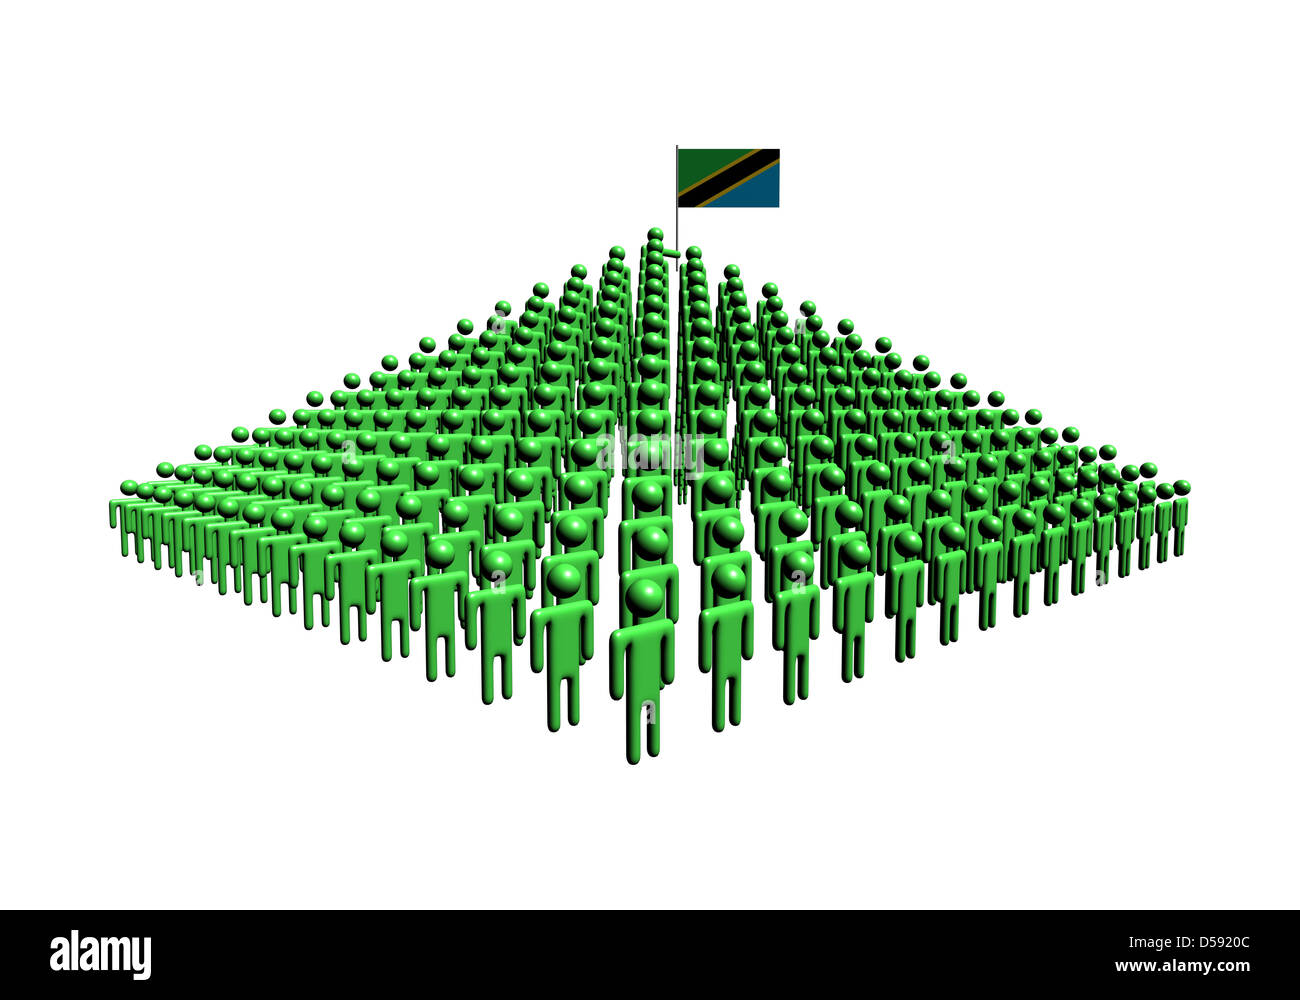 Pyramid of abstract people with Tanzania flag illustration Stock Photo